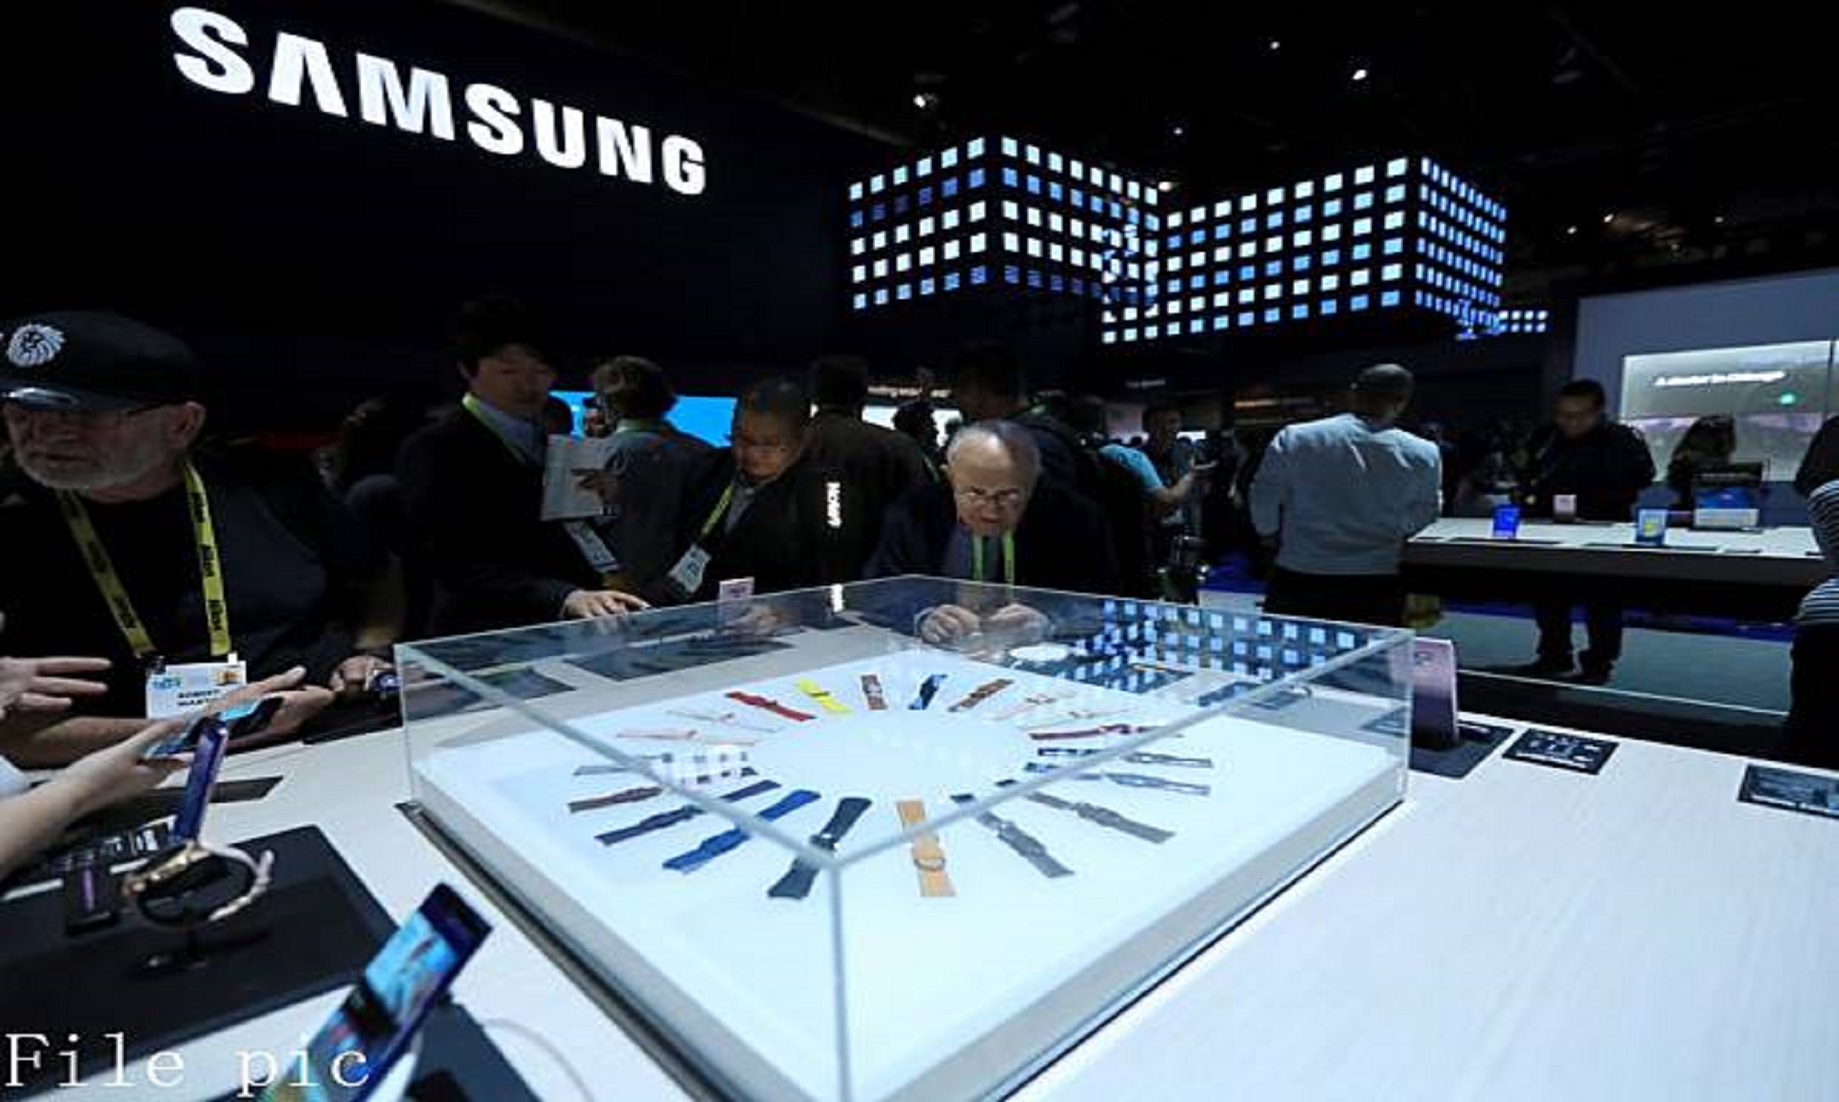 Iran May Take Punitive Measures Against Samsung: Official